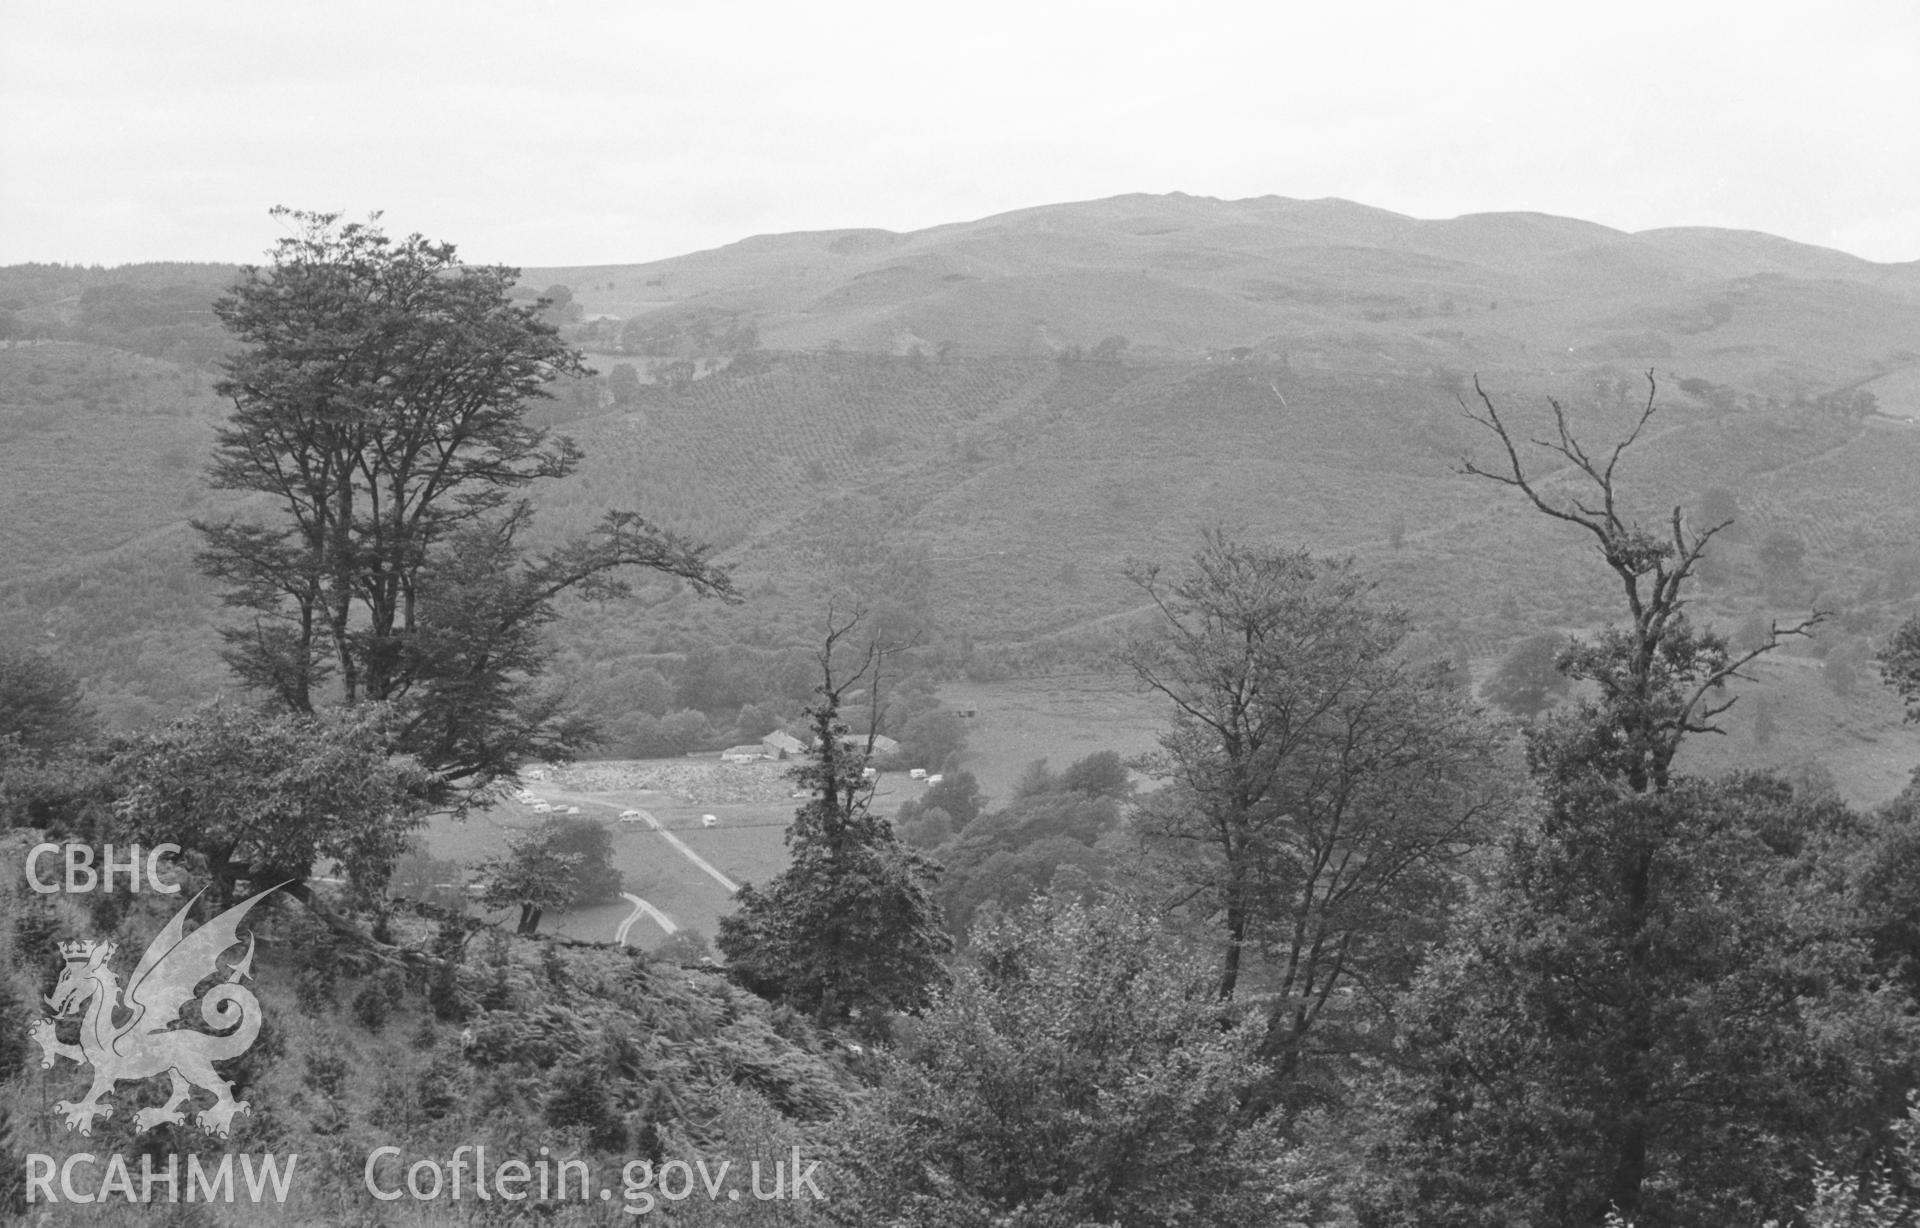 Digital copy of black & white photograph showing site of Hafod (now Caravan Club site) from lane near top of Allt Dihanog (SN761726) looking north west. Old beech tree presumably planted by Thomas Johnes. Photograph by Arthur O. Chater, August 1963.